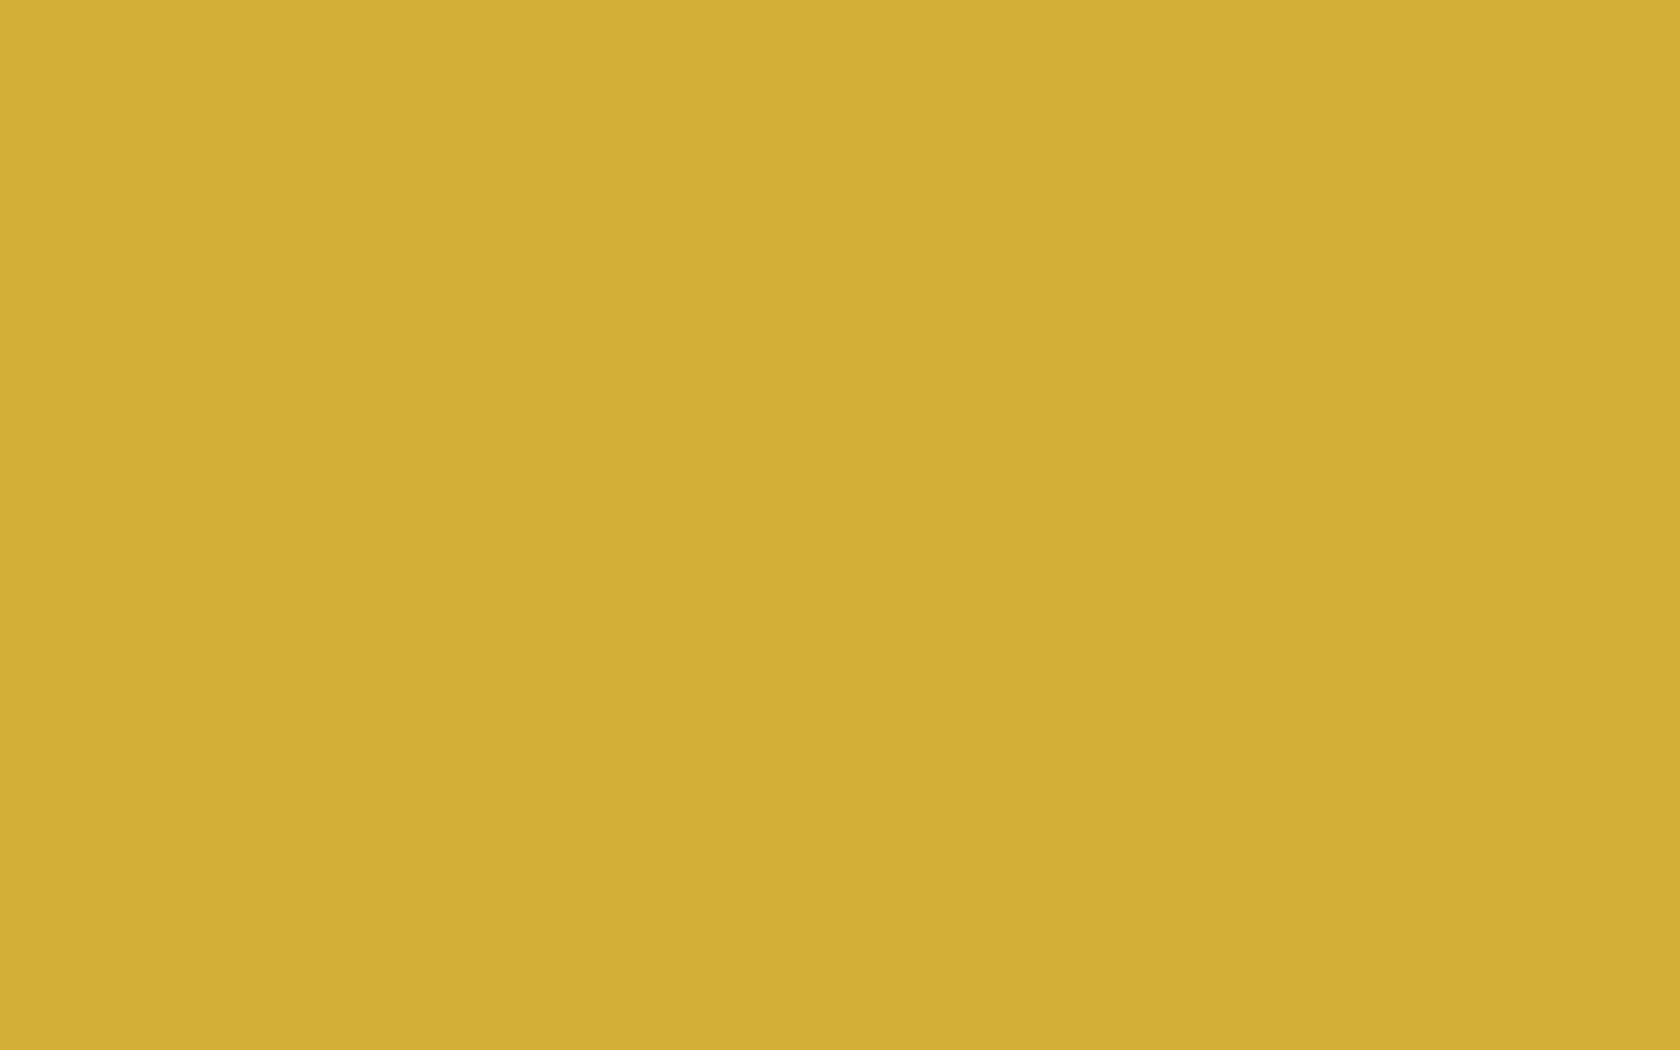  1680x1050 resolution Gold Metallic solid color background view